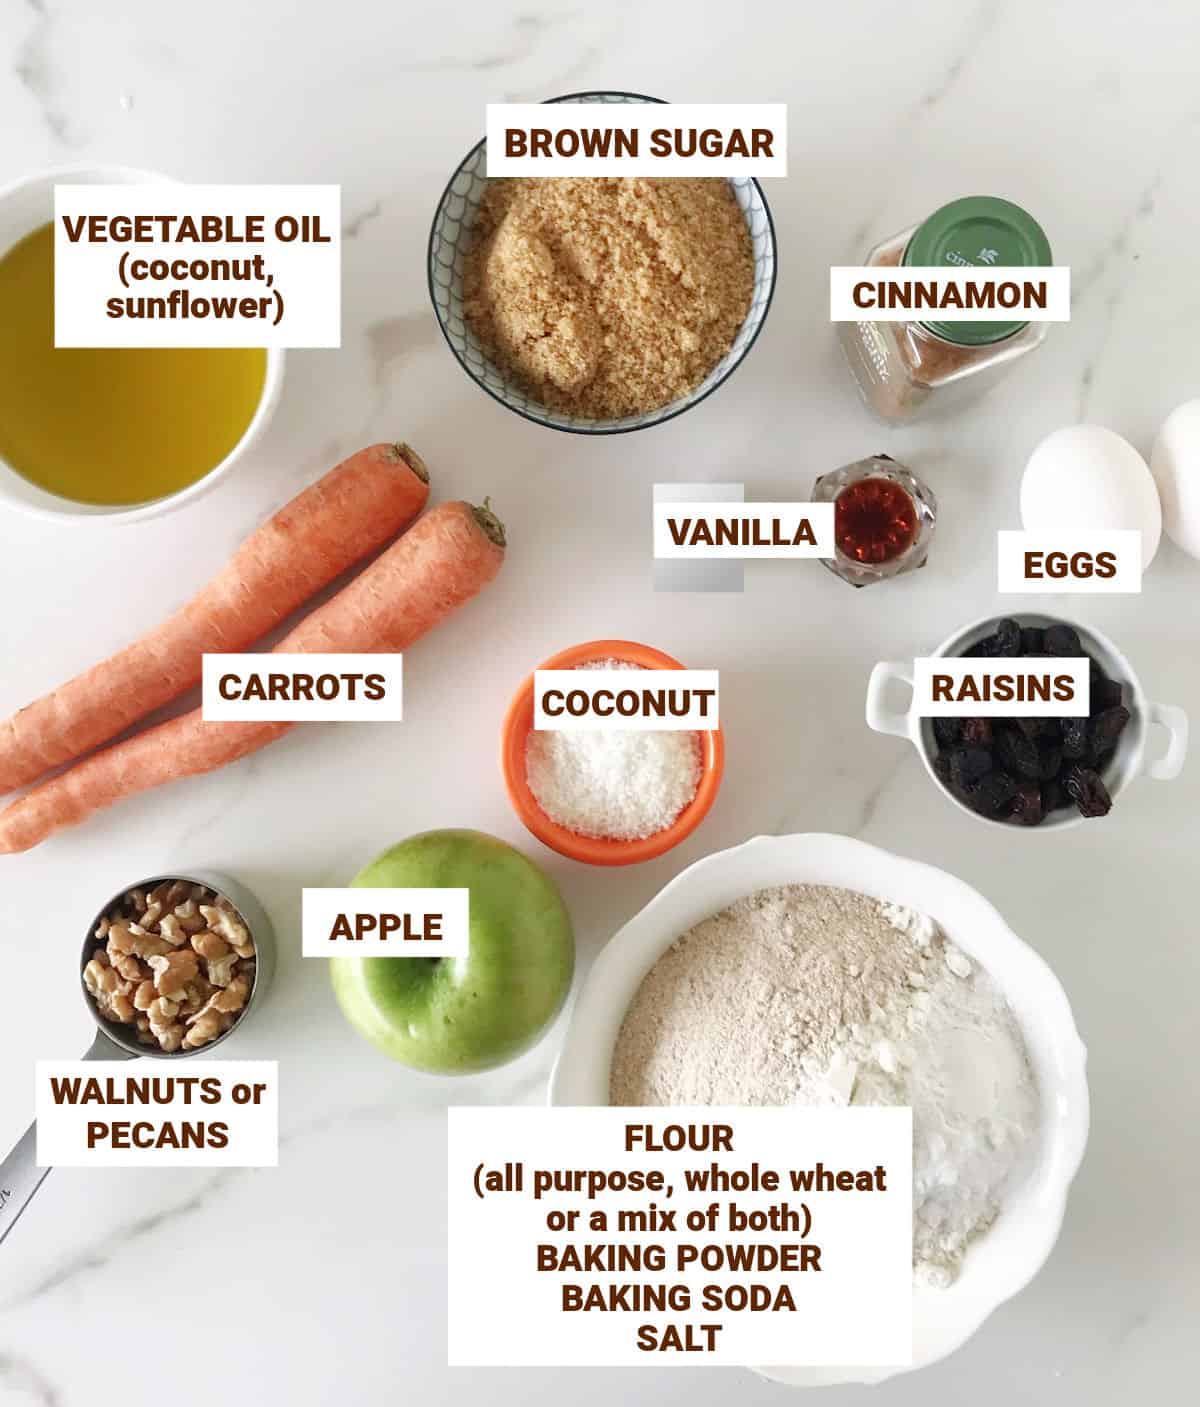 Ingredients in bowls on white marble surface including apple, carrots, oil, spices, walnuts, flour, raisins, sugar.